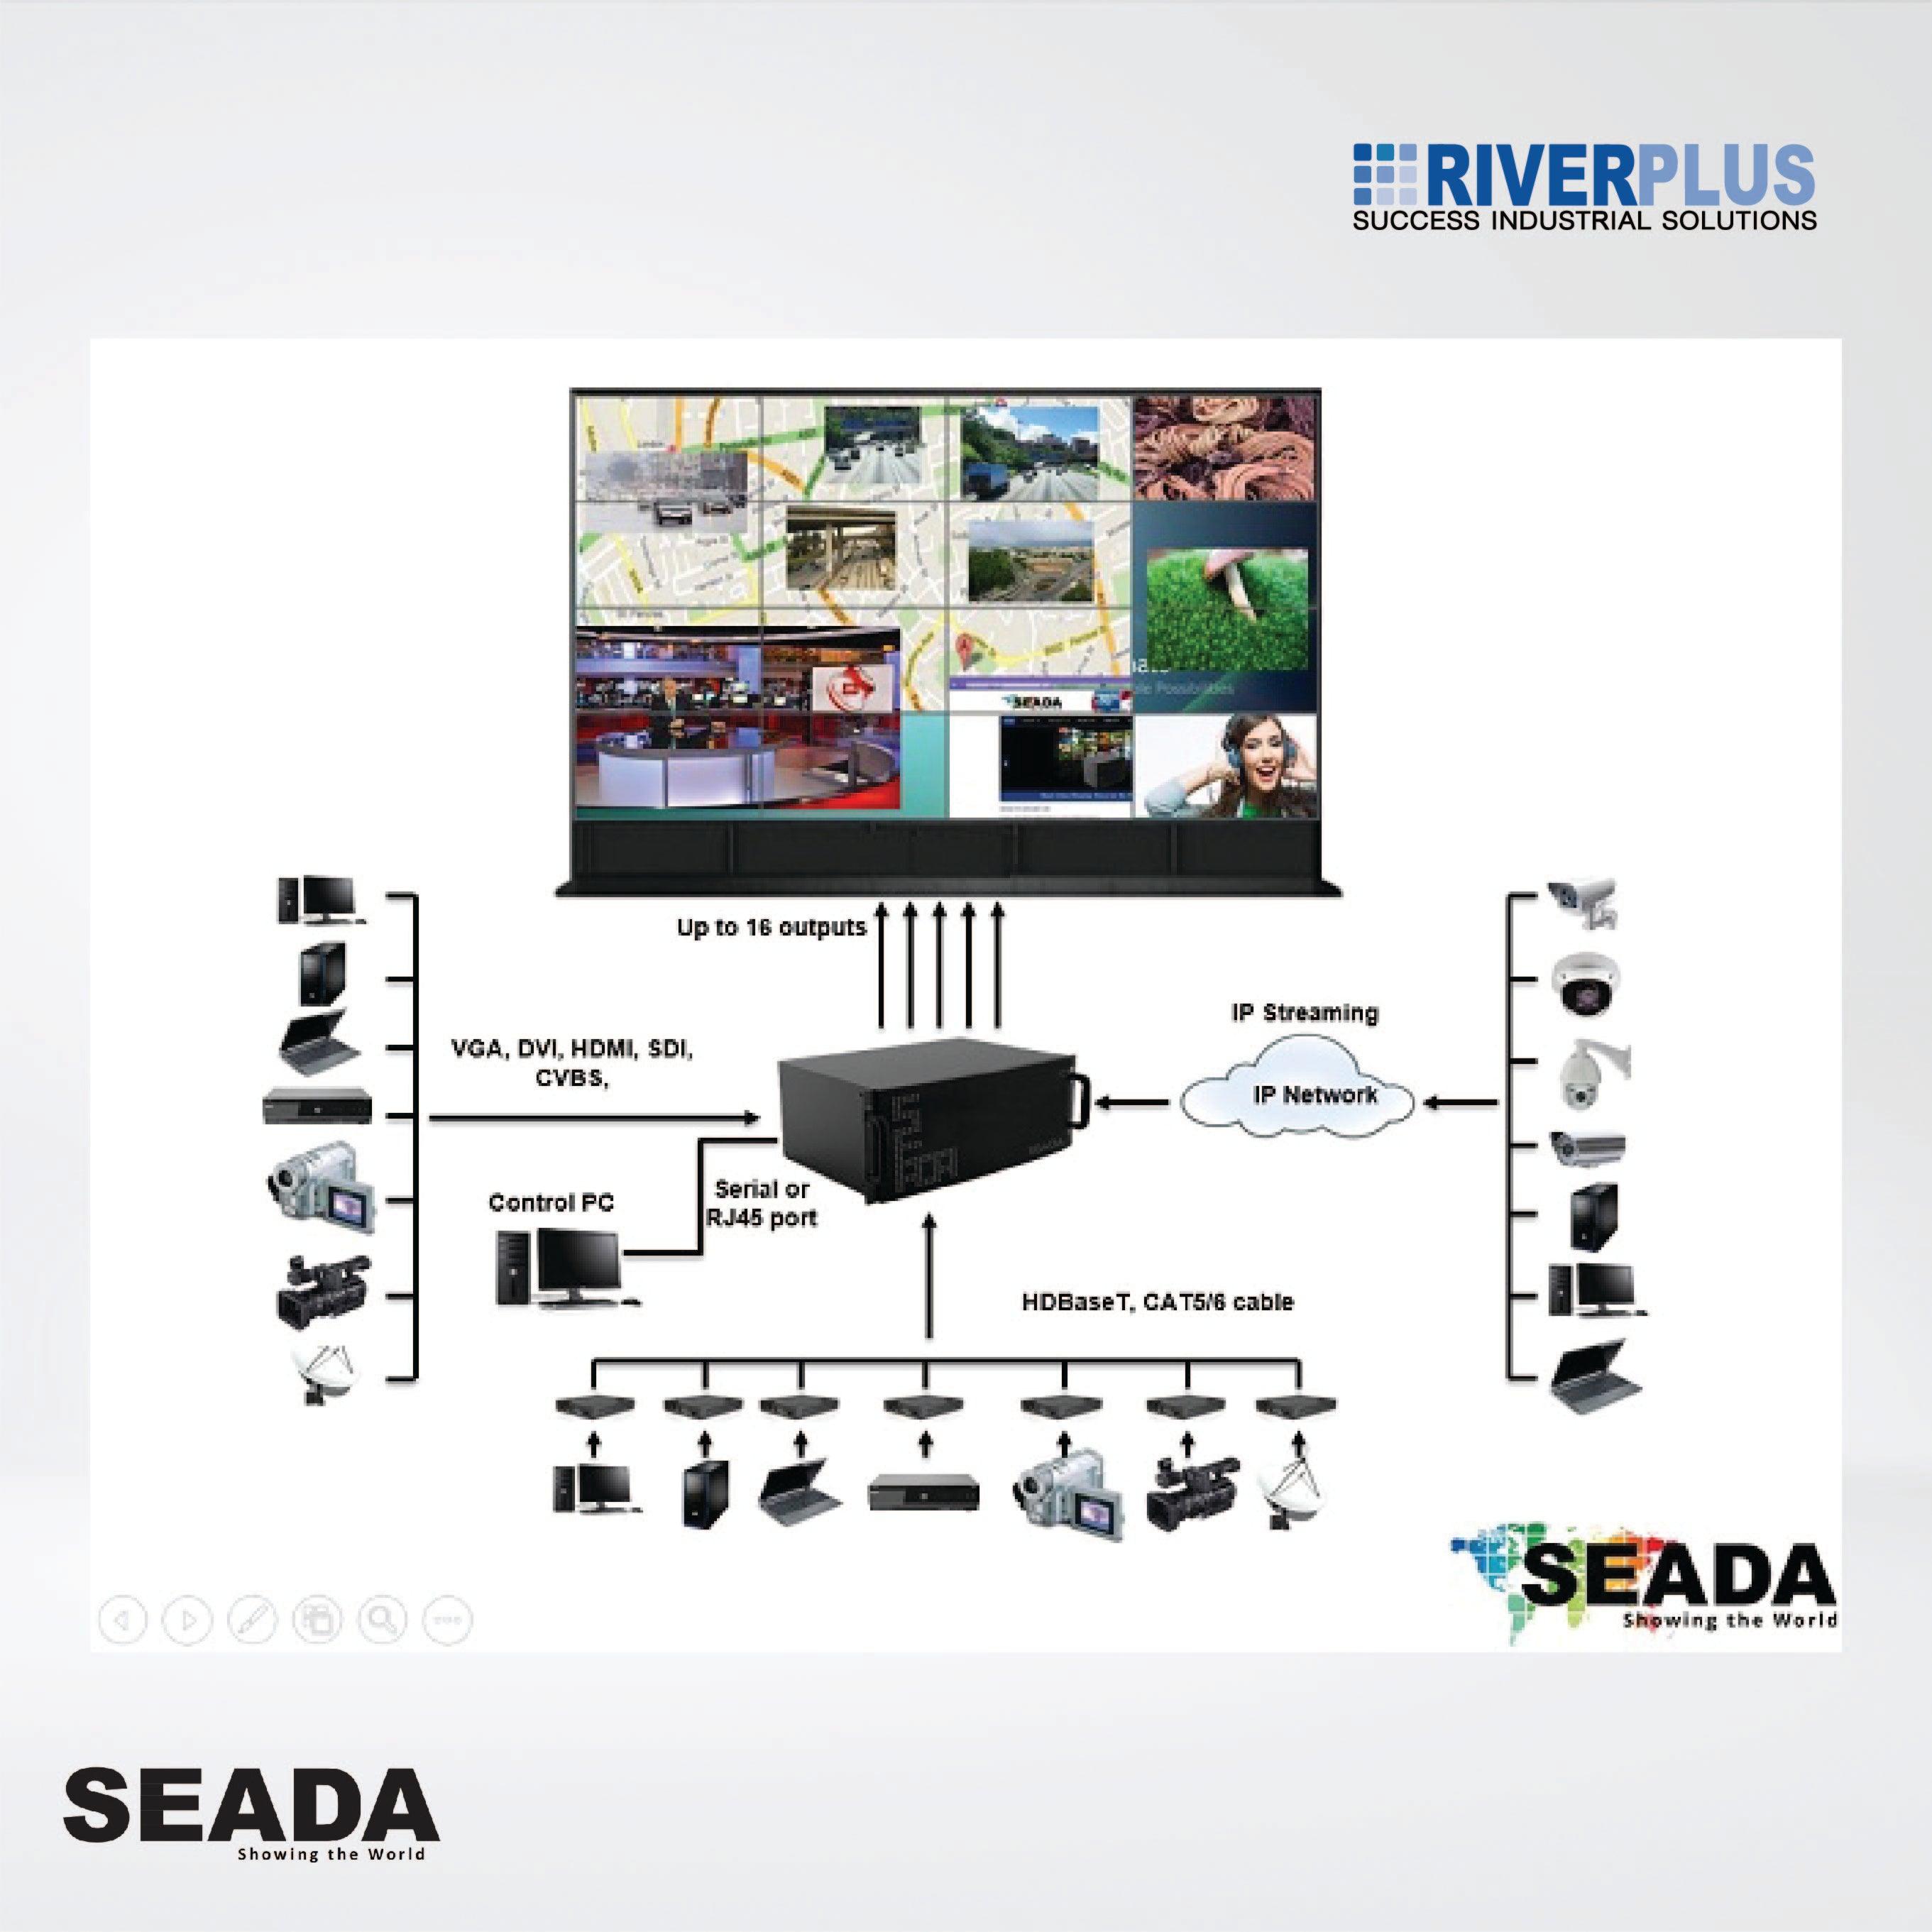 SW2016 Medium size video wall ,Able to capture maximum 16 HD video inputs - Riverplus